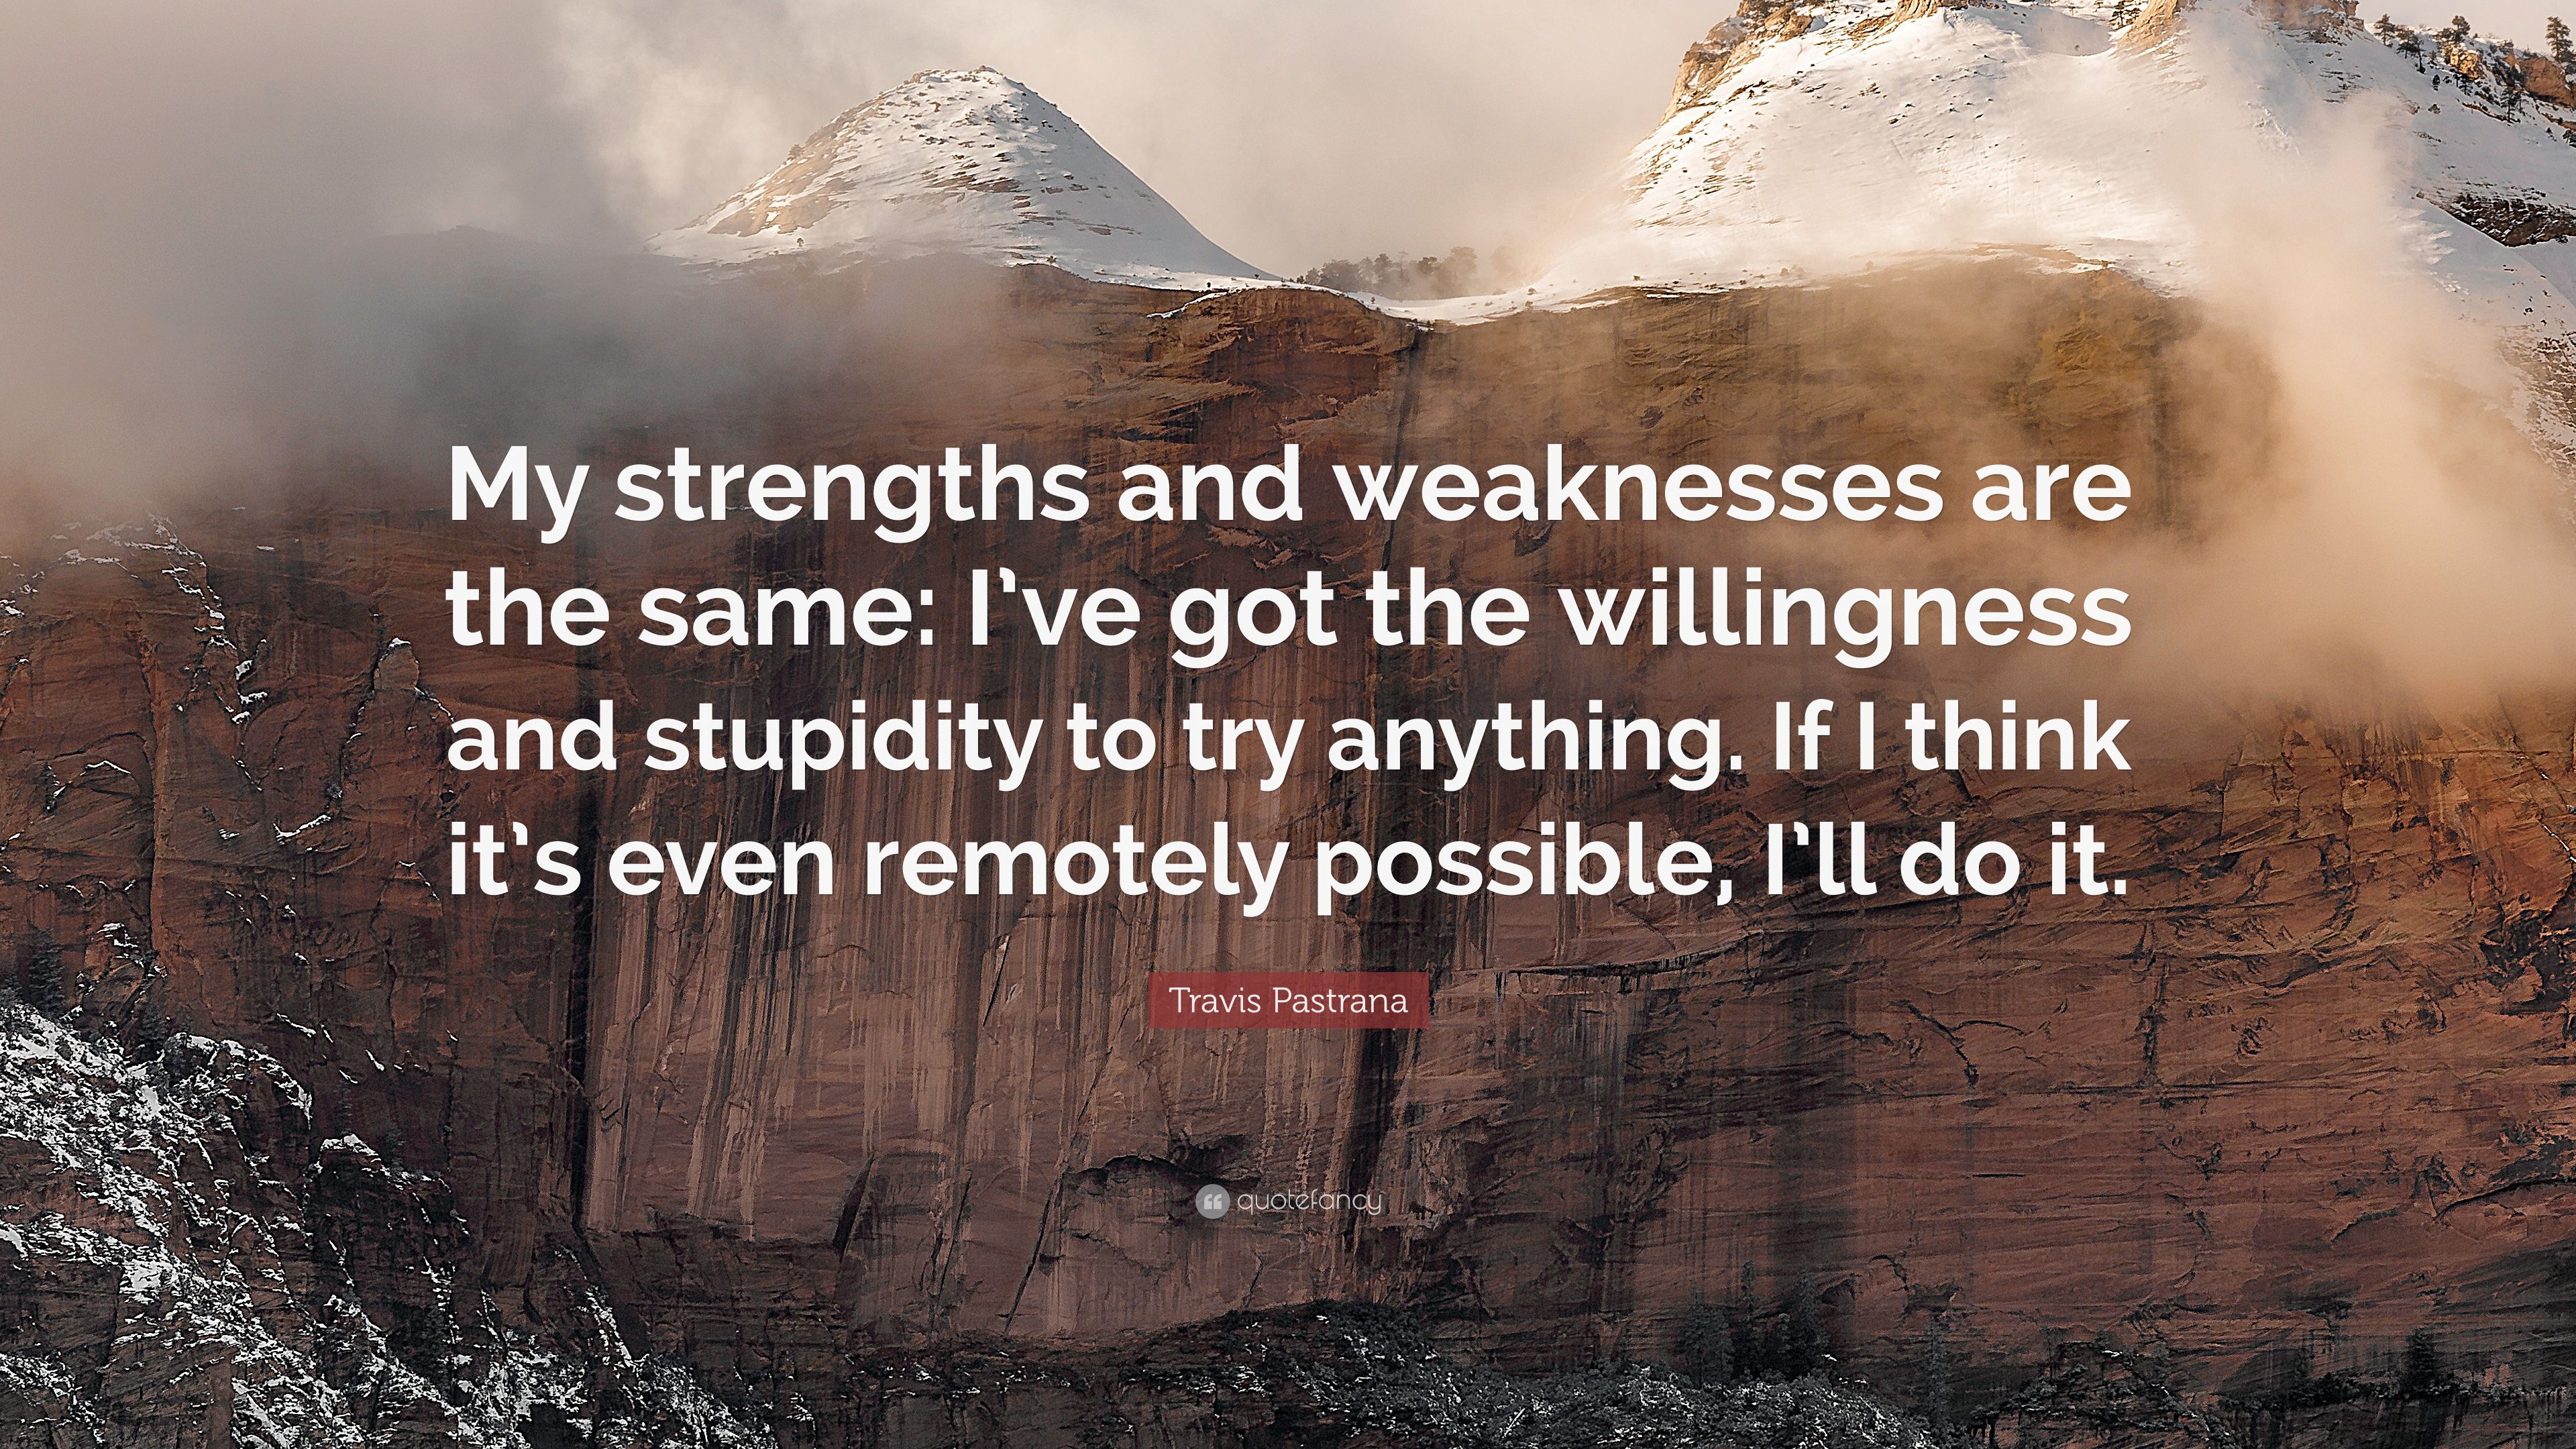 Travis Pastrana Quote: “My strengths and weaknesses are the same: I